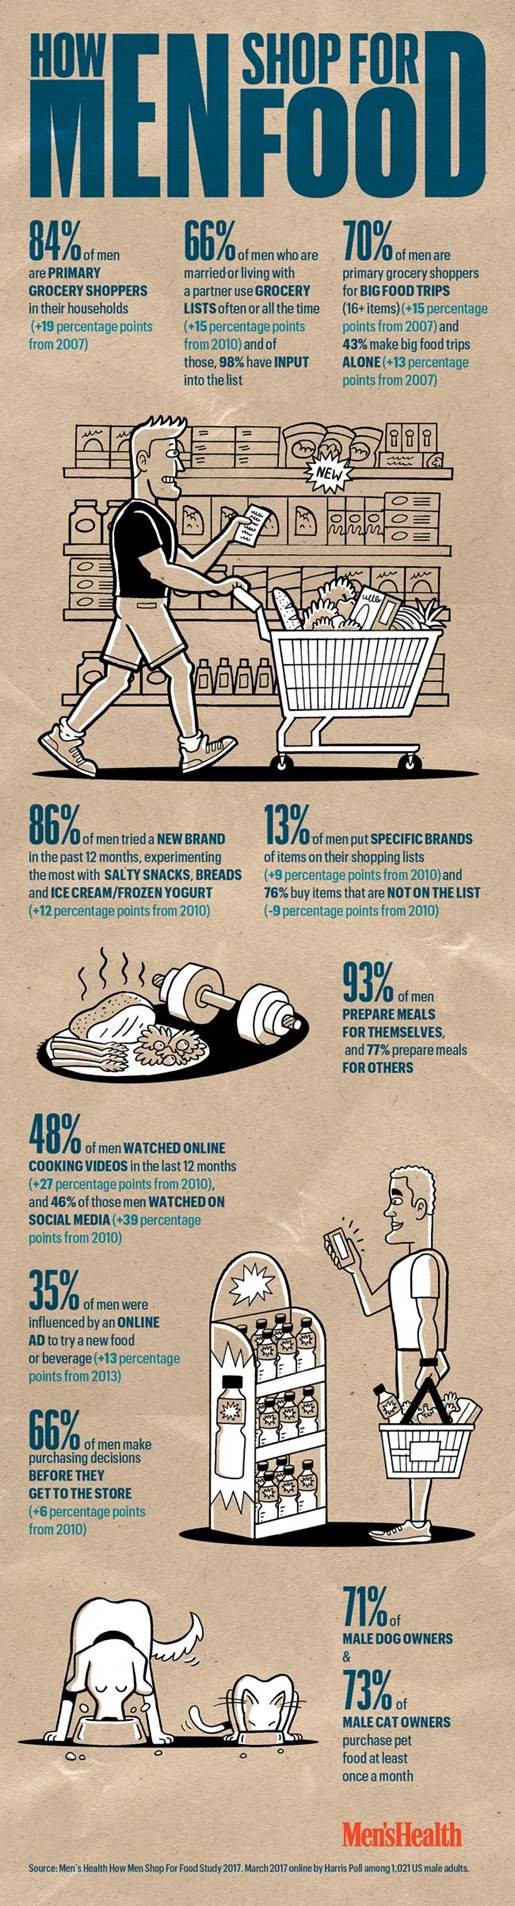 Men Grocery Shopping Infographic